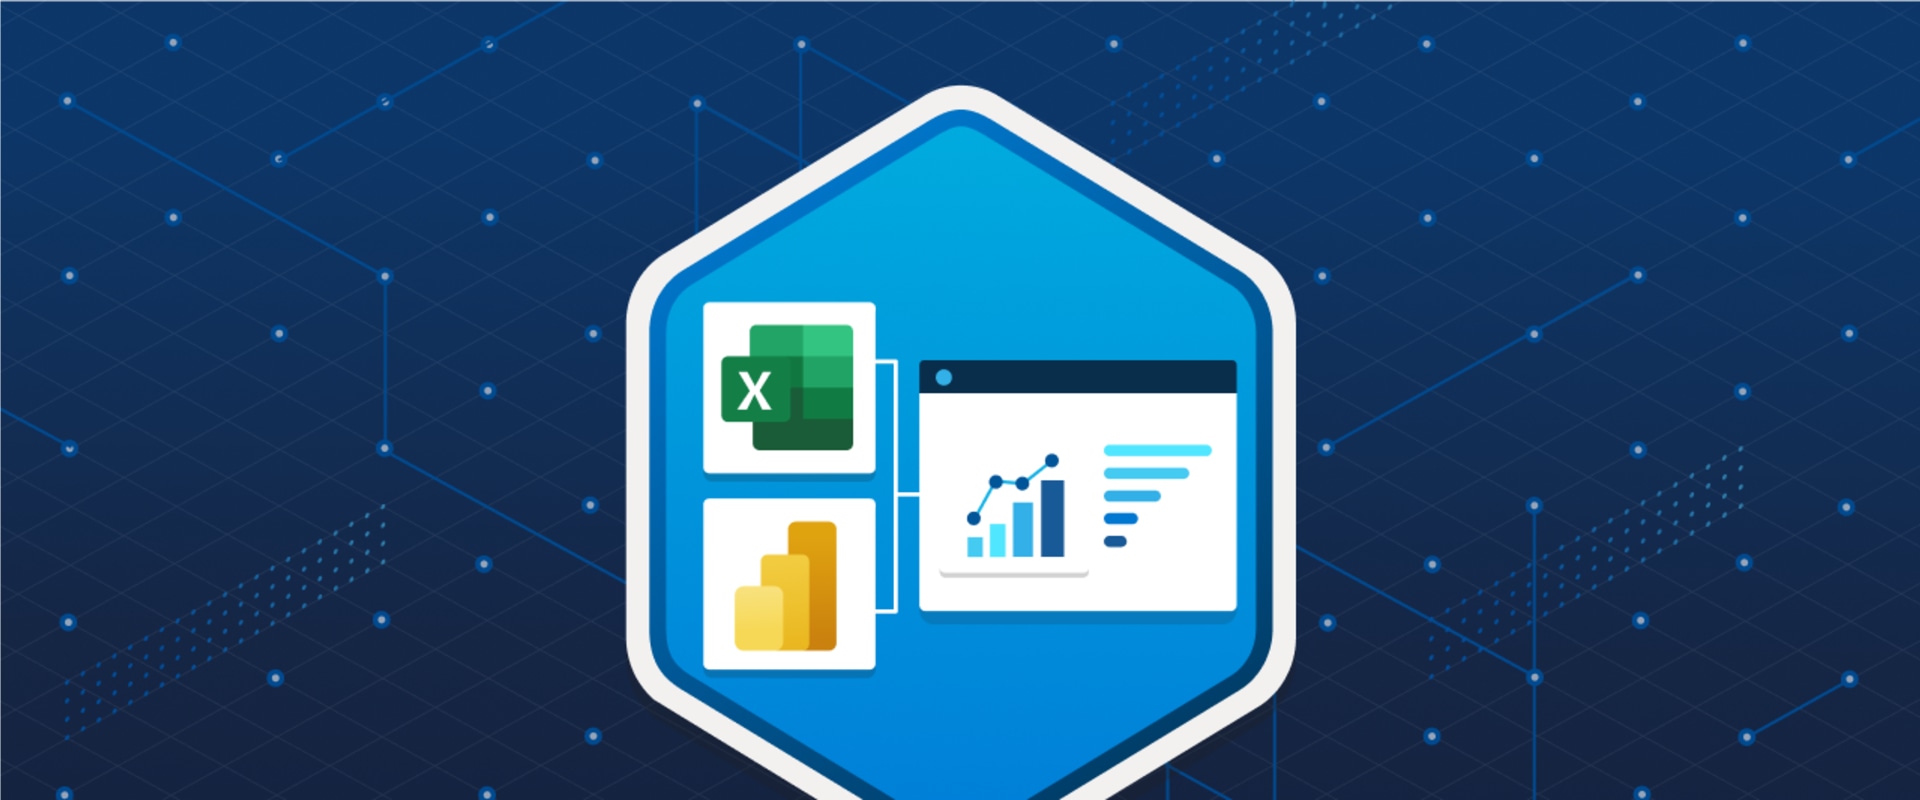 Is excel a business intelligence tools?